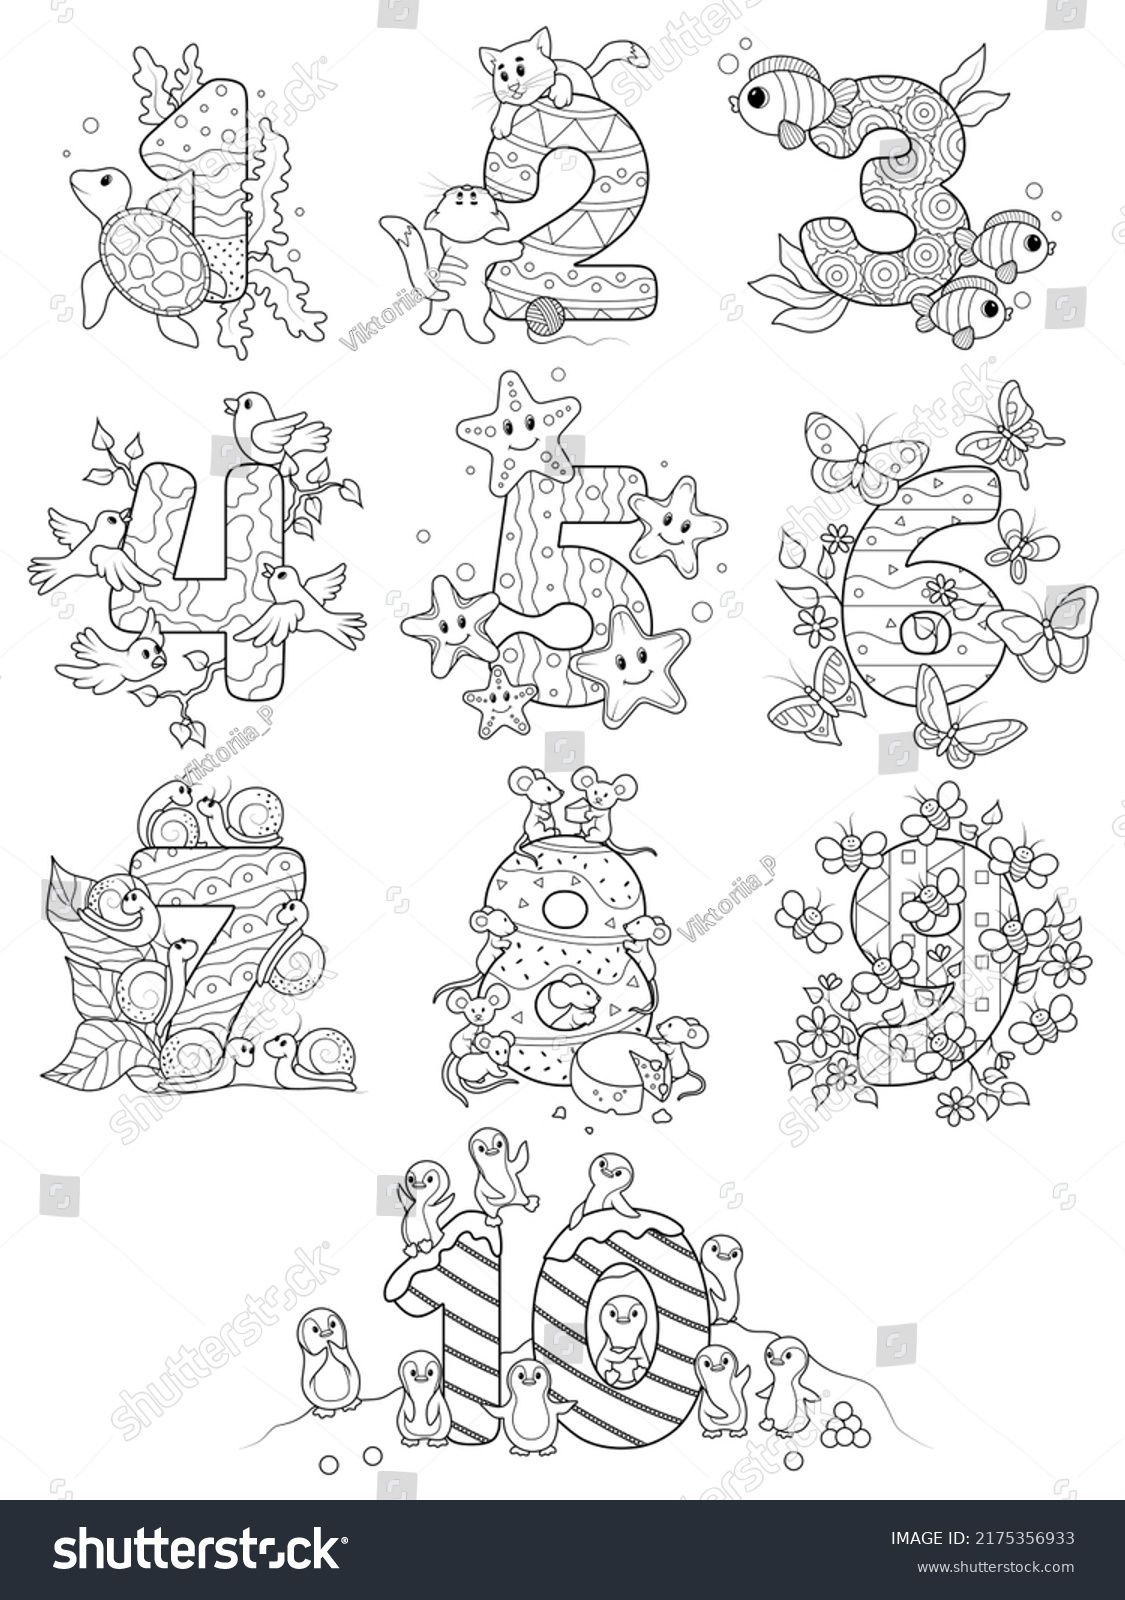 SVG of Coloring page - Numbers. Education and fun for childrens. Printable sheet - 1 to 10. svg